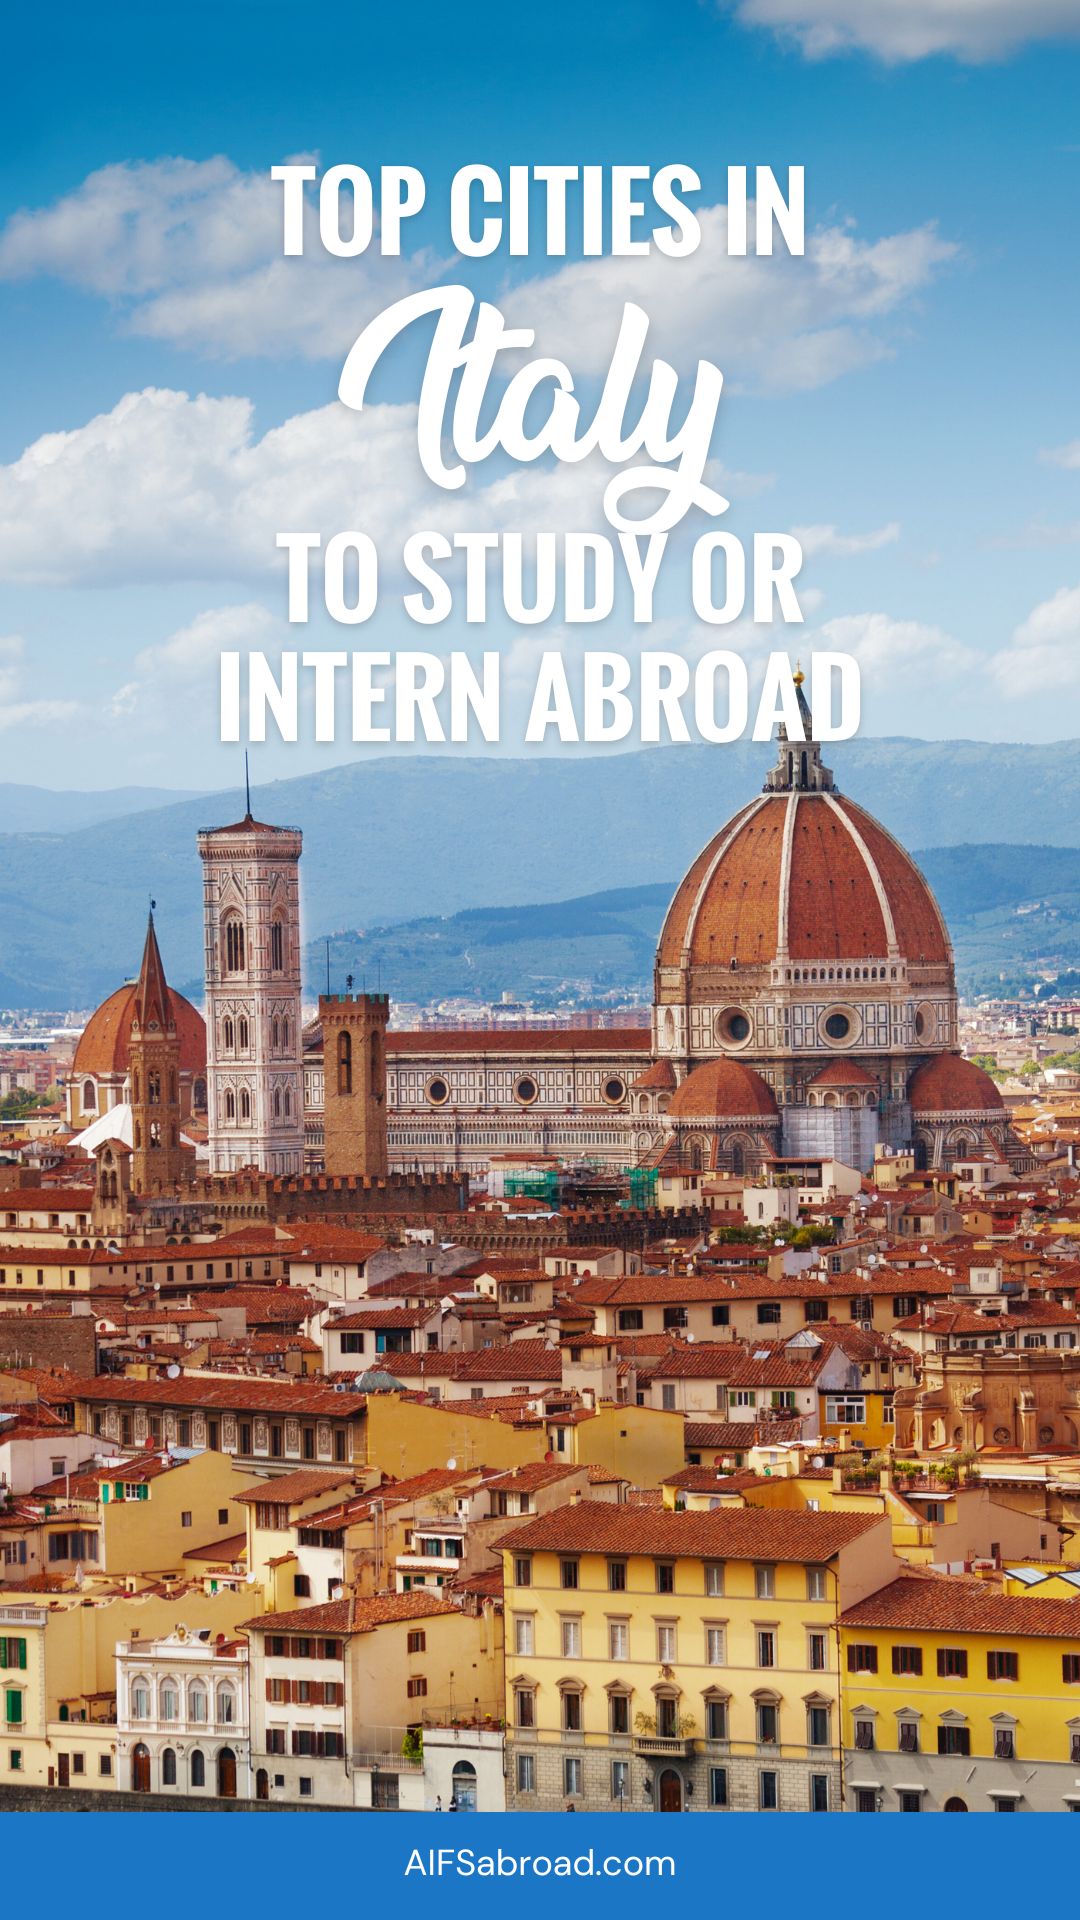 Pin image: Photo of Florence with text reading "Top cities in Italy to study or intern abroad"